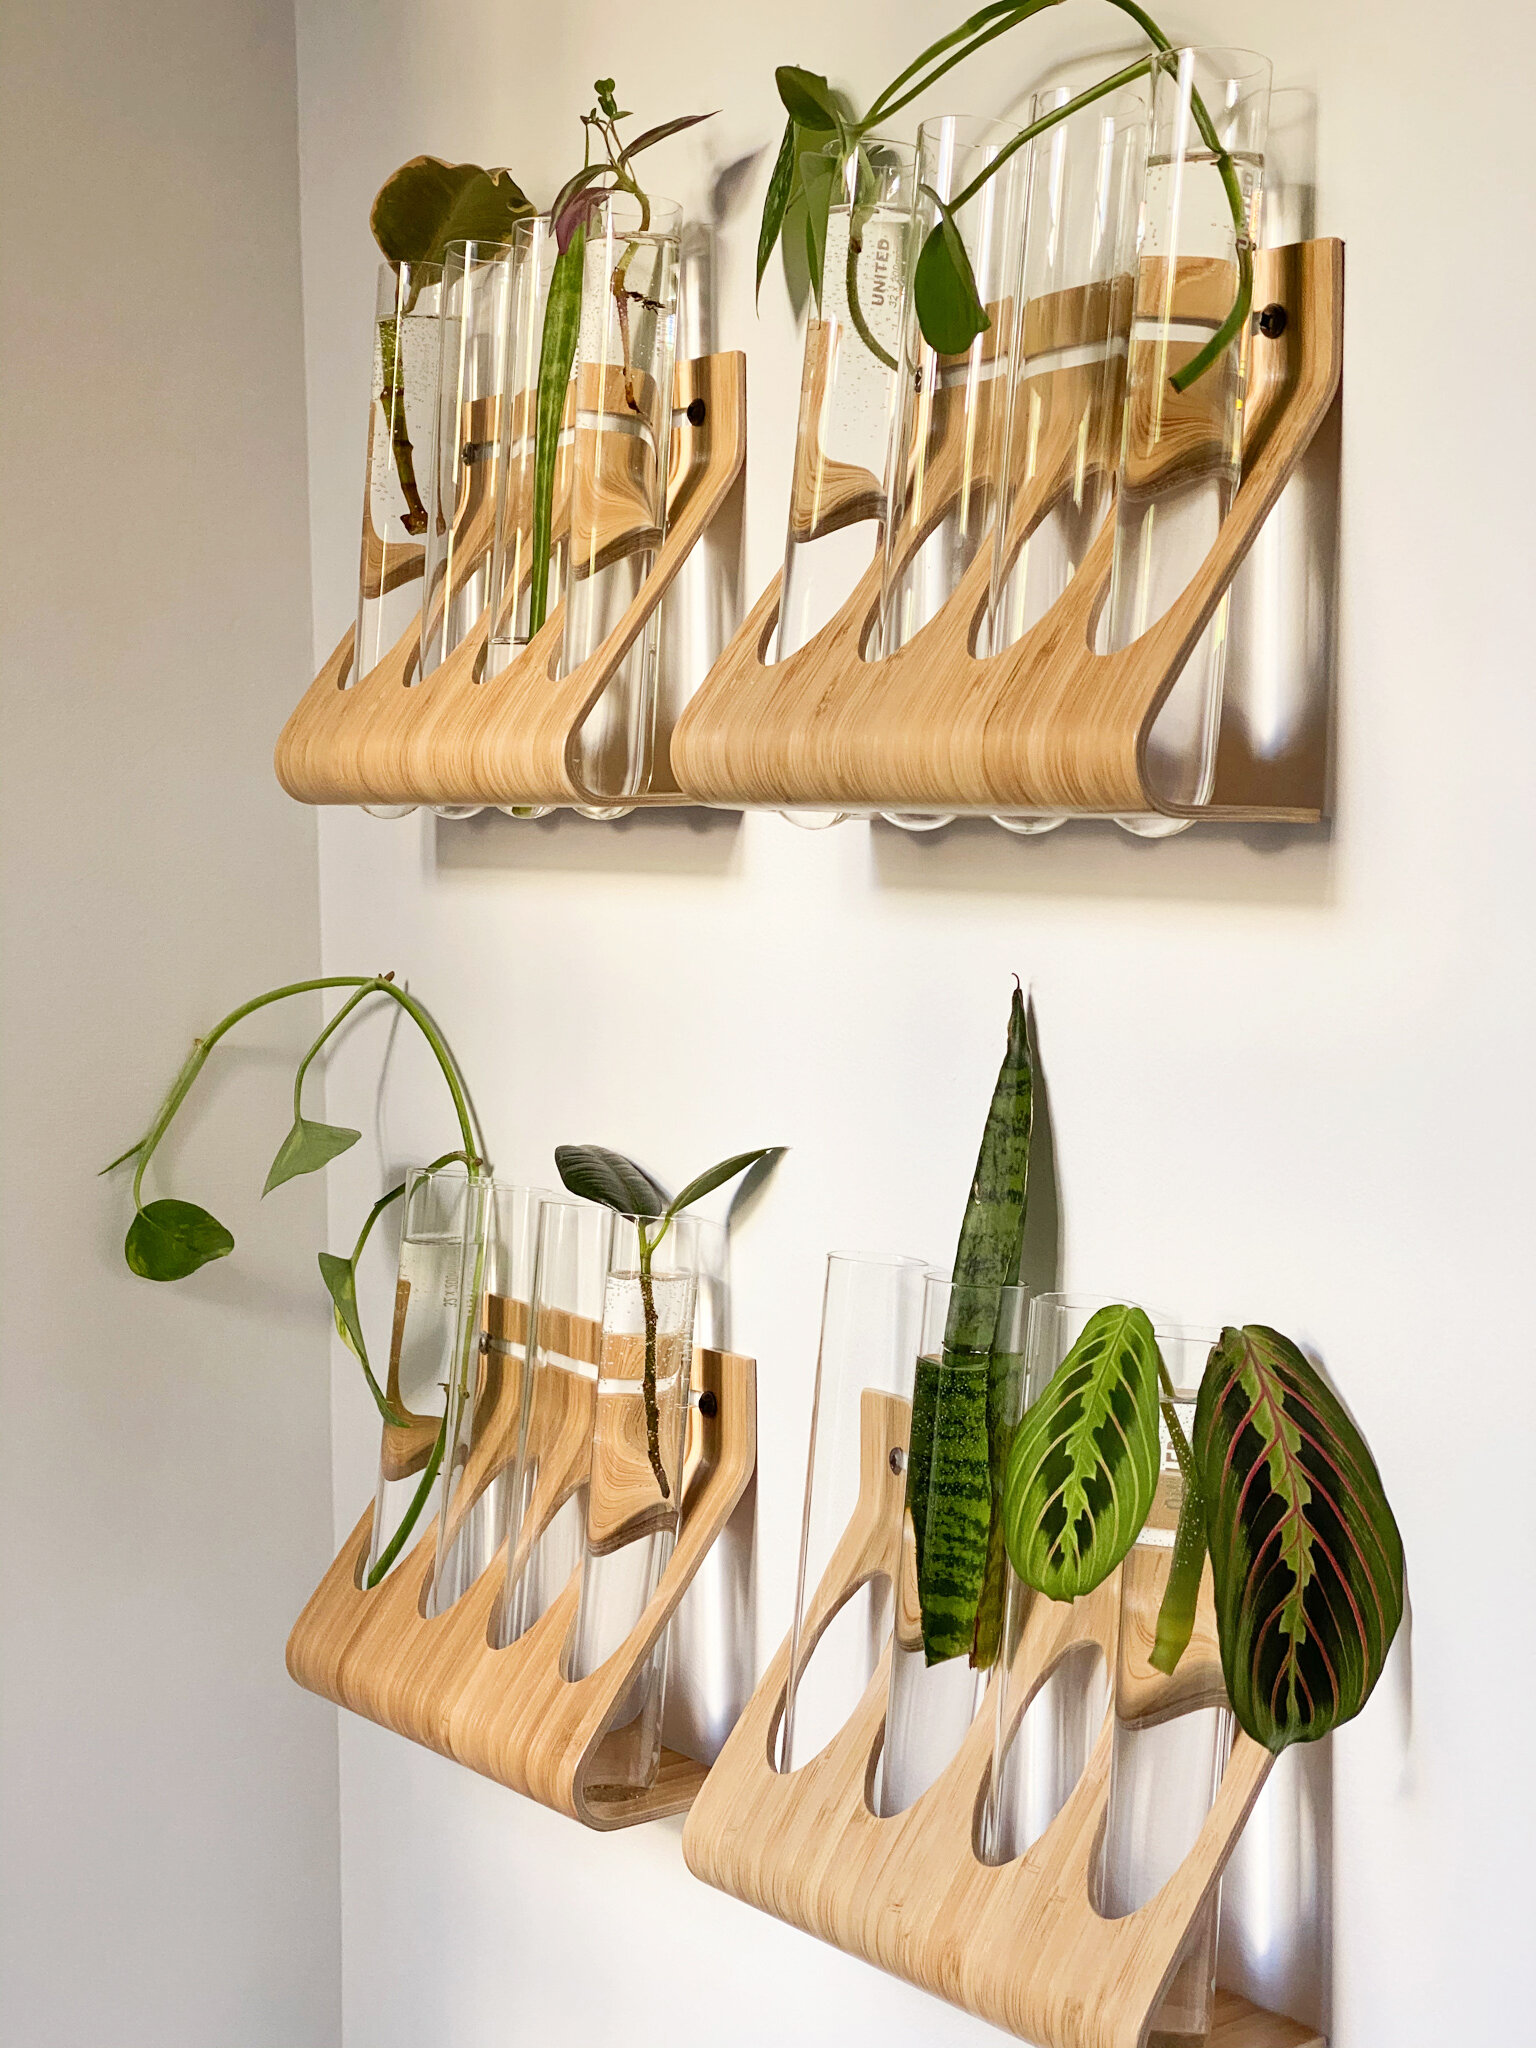  We repurposed spice racks from Ikea and test tubes from a supplier to create the cutting wall. 